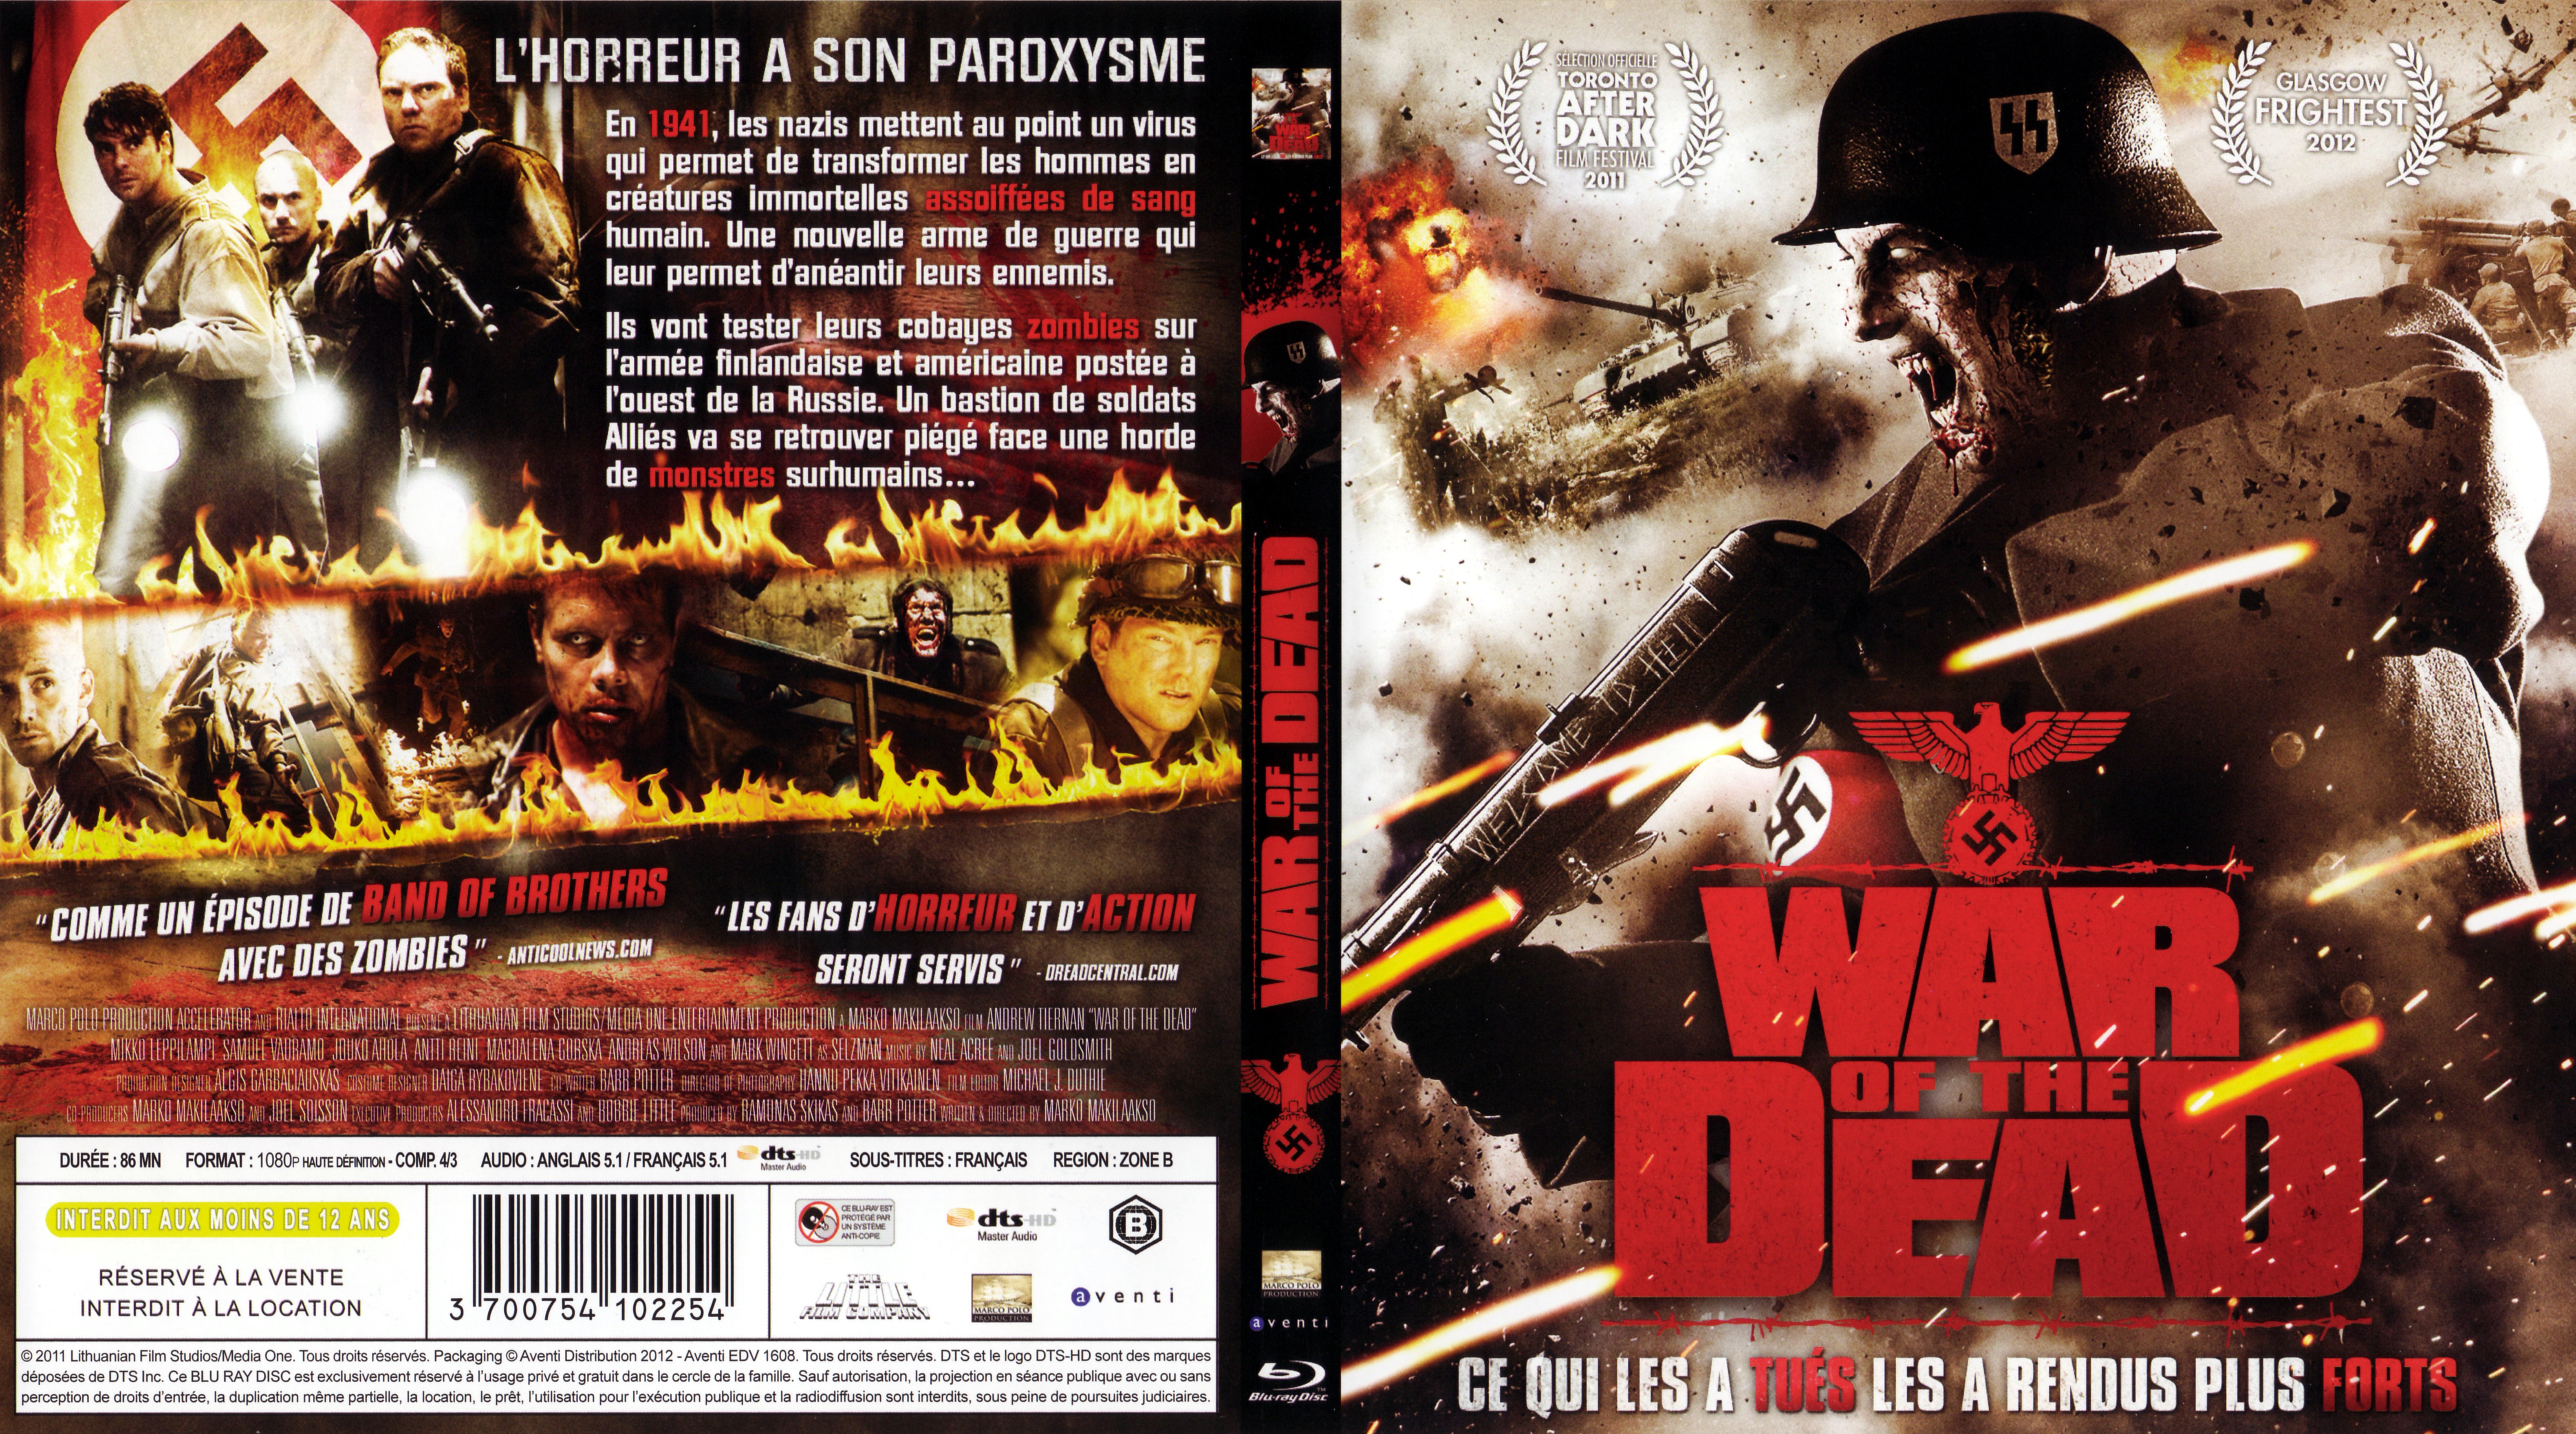 Jaquette DVD War of the dead (BLU-RAY)